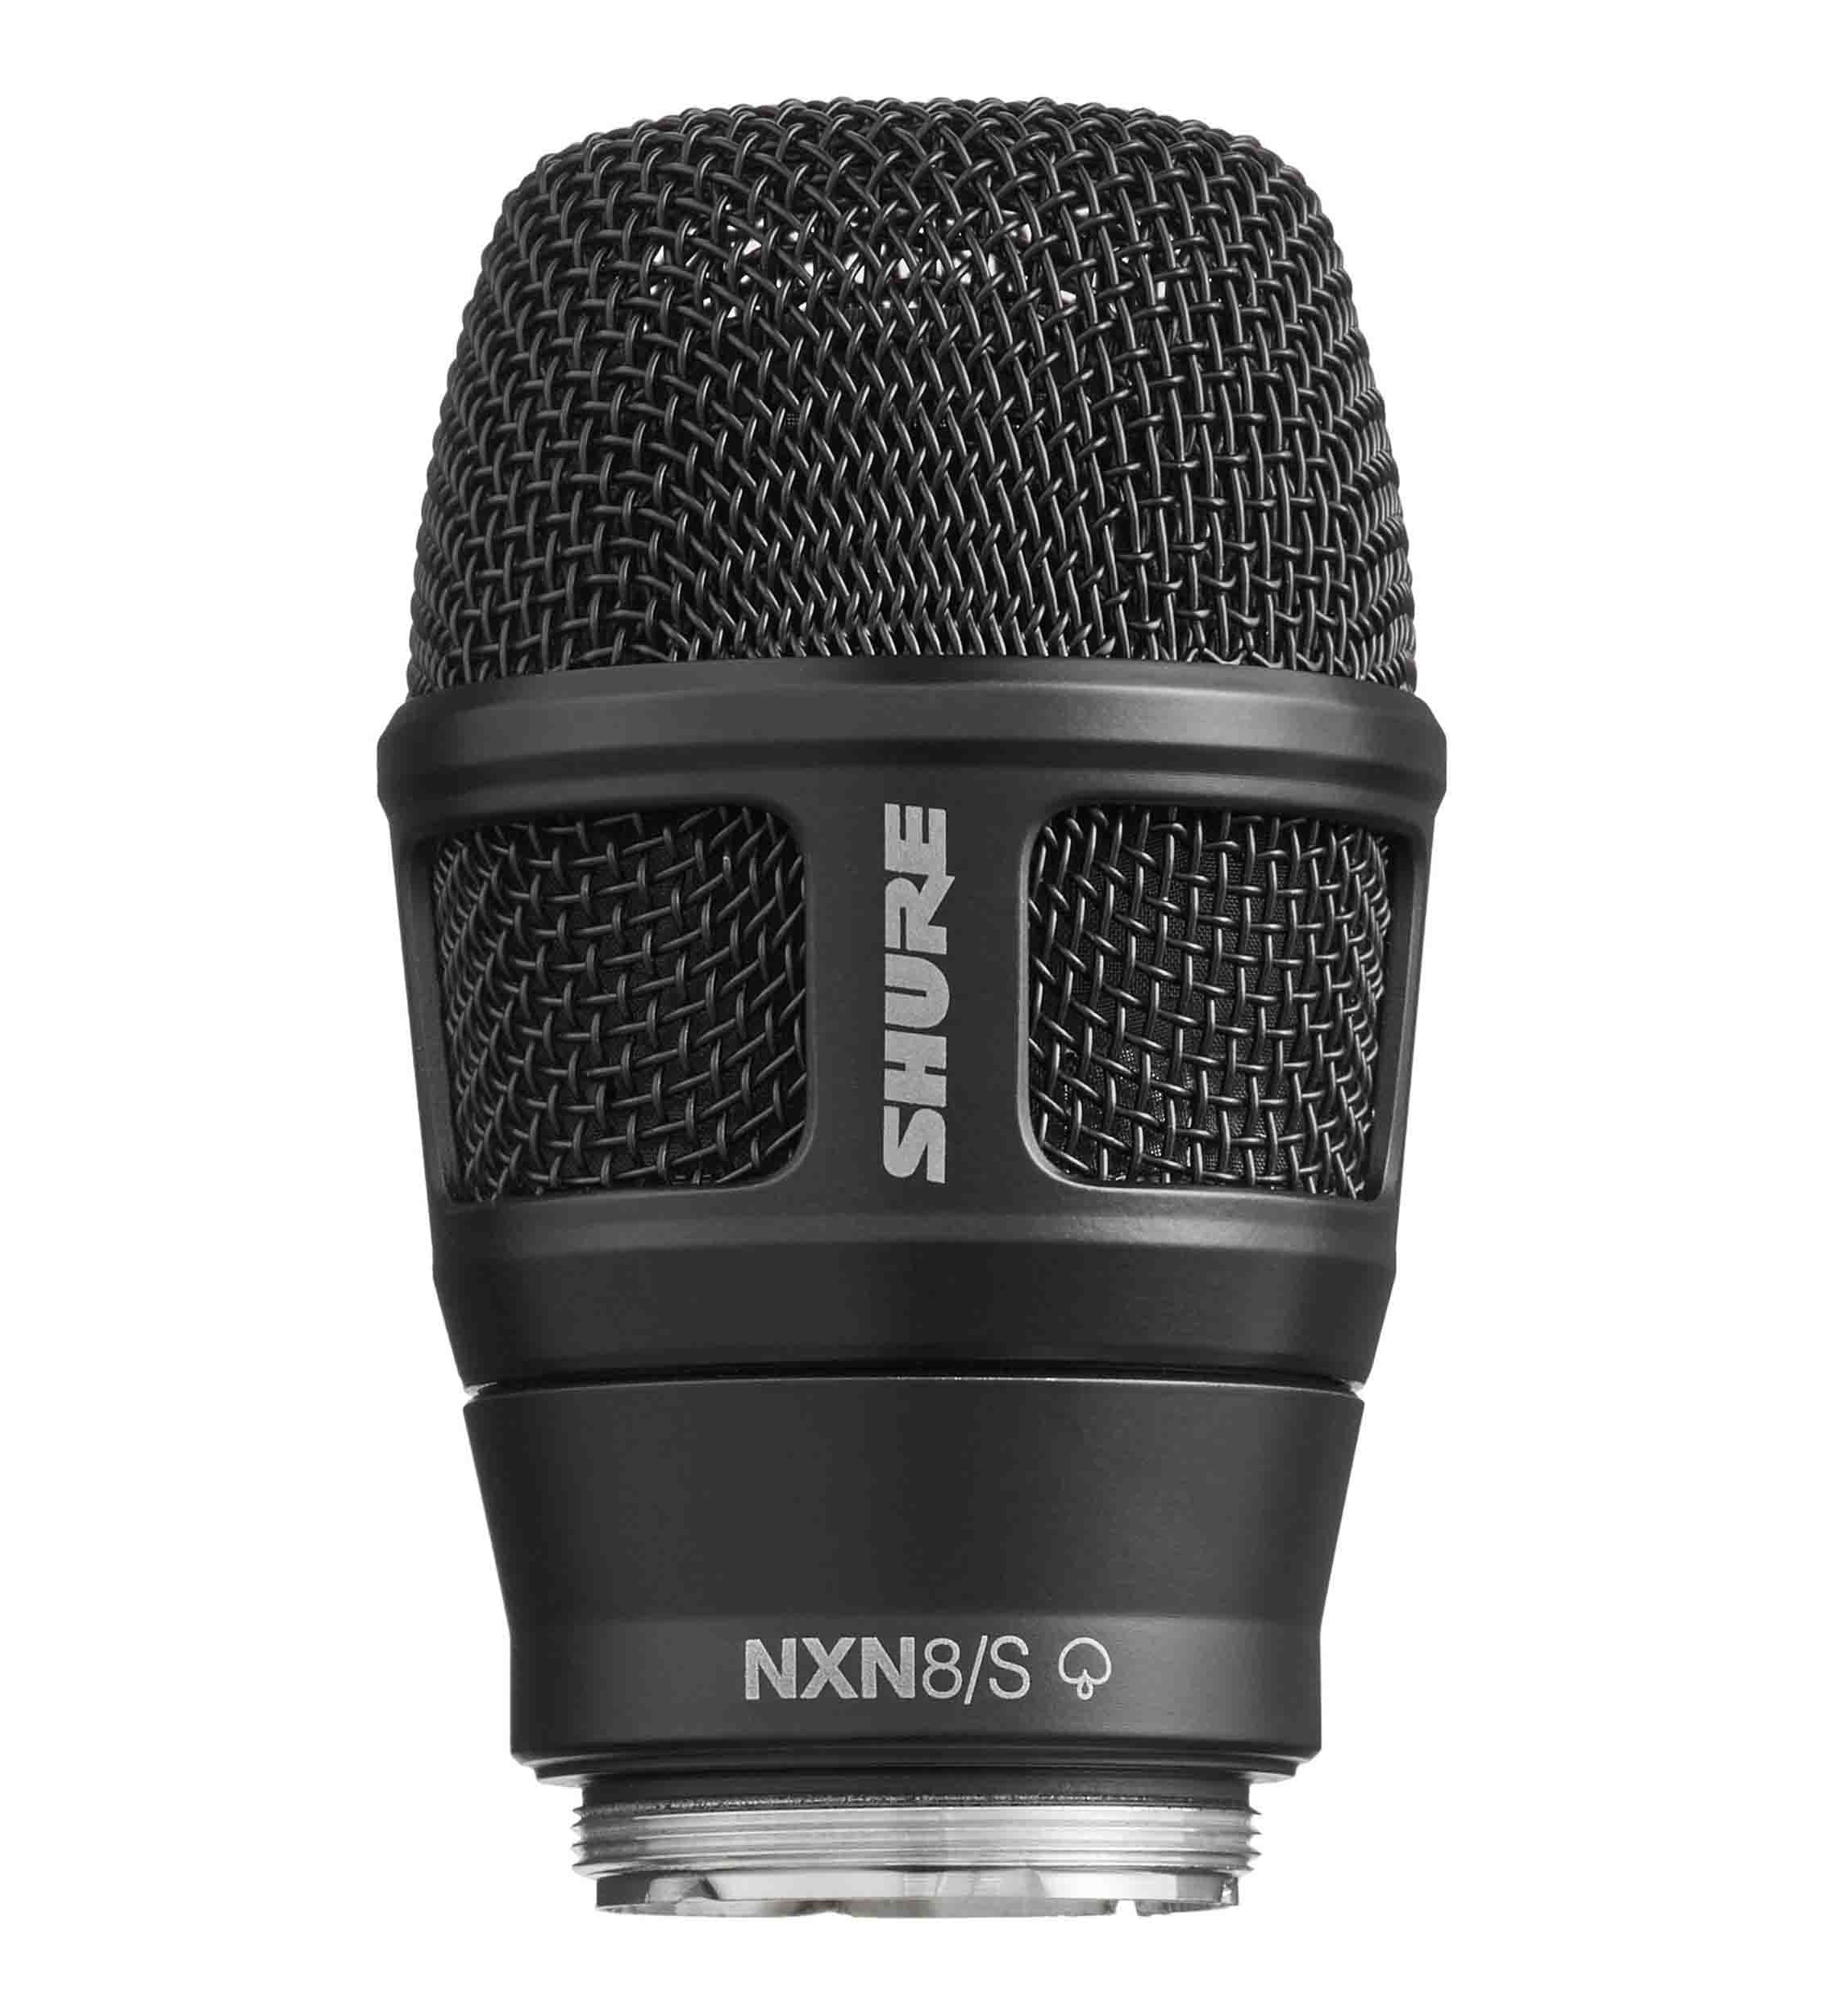 Shure Nexadyne 8/S Supercardioid Revonic Microphone Capsule for Wireless Transmitters by Shure